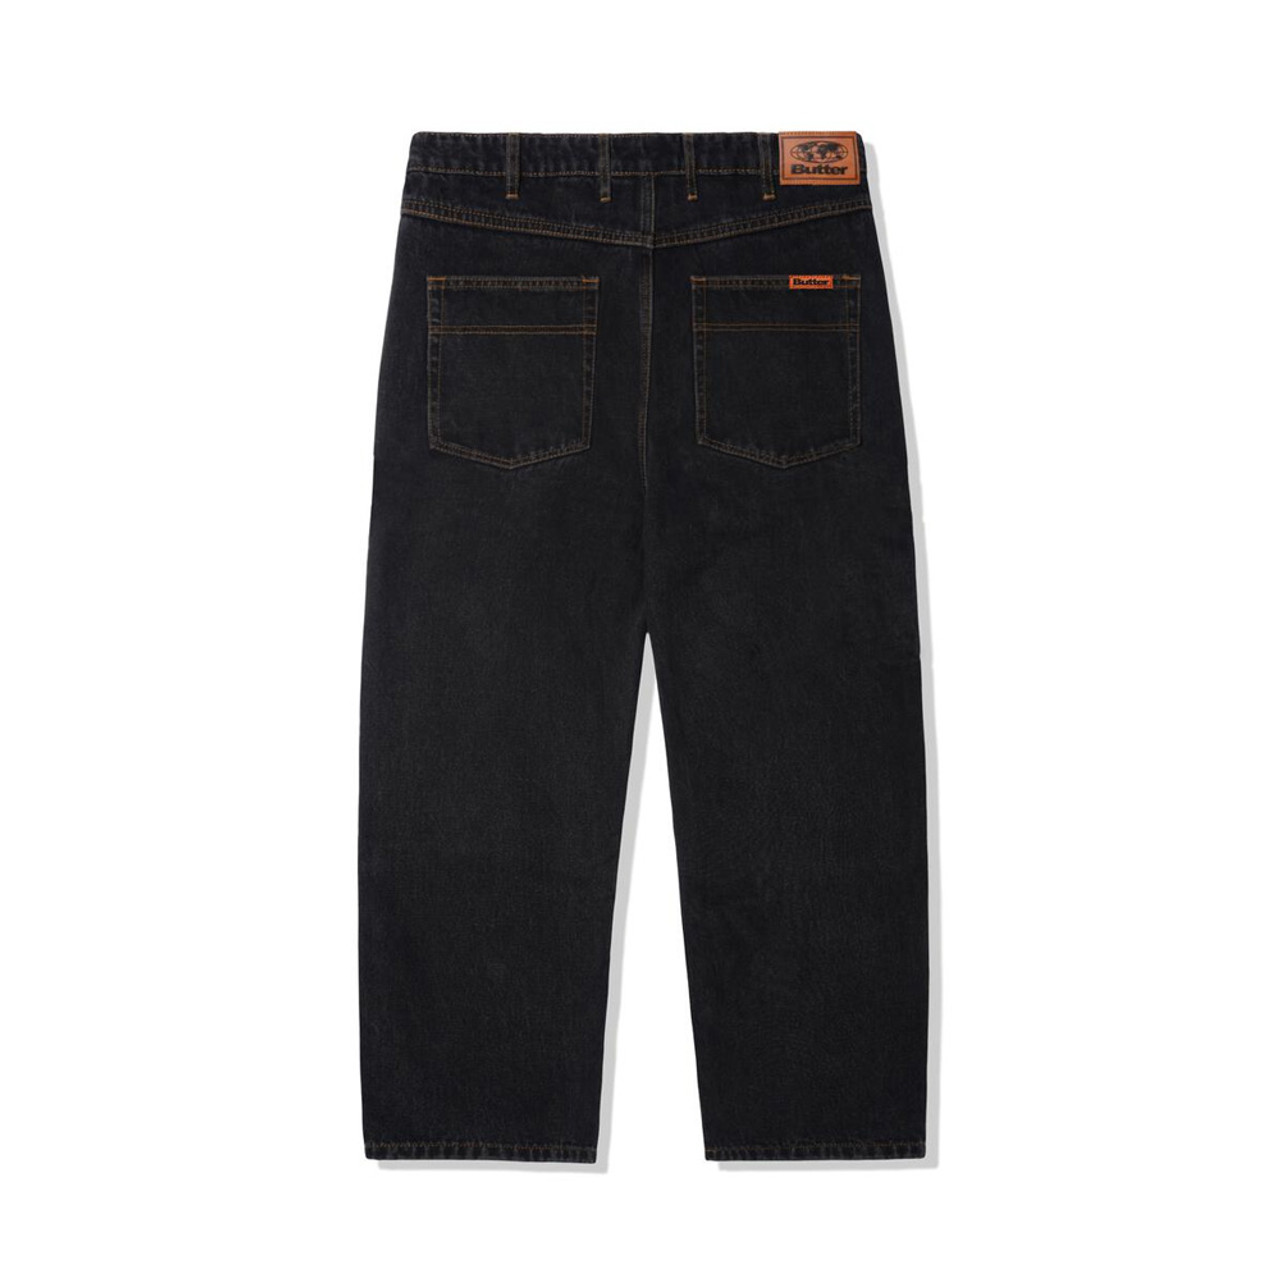 BUTTER GOODS Relaxed Denim Jeans Washed Black